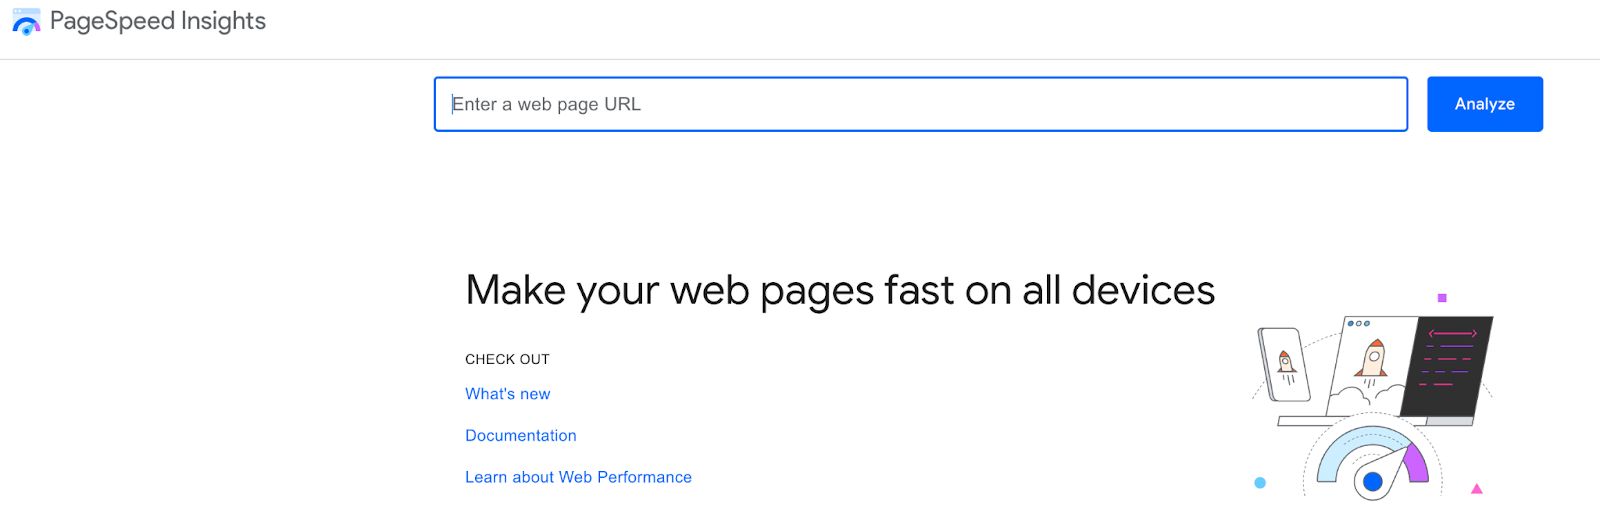 The homepage for Google PageSpeed Insights prompts you to input a URL.